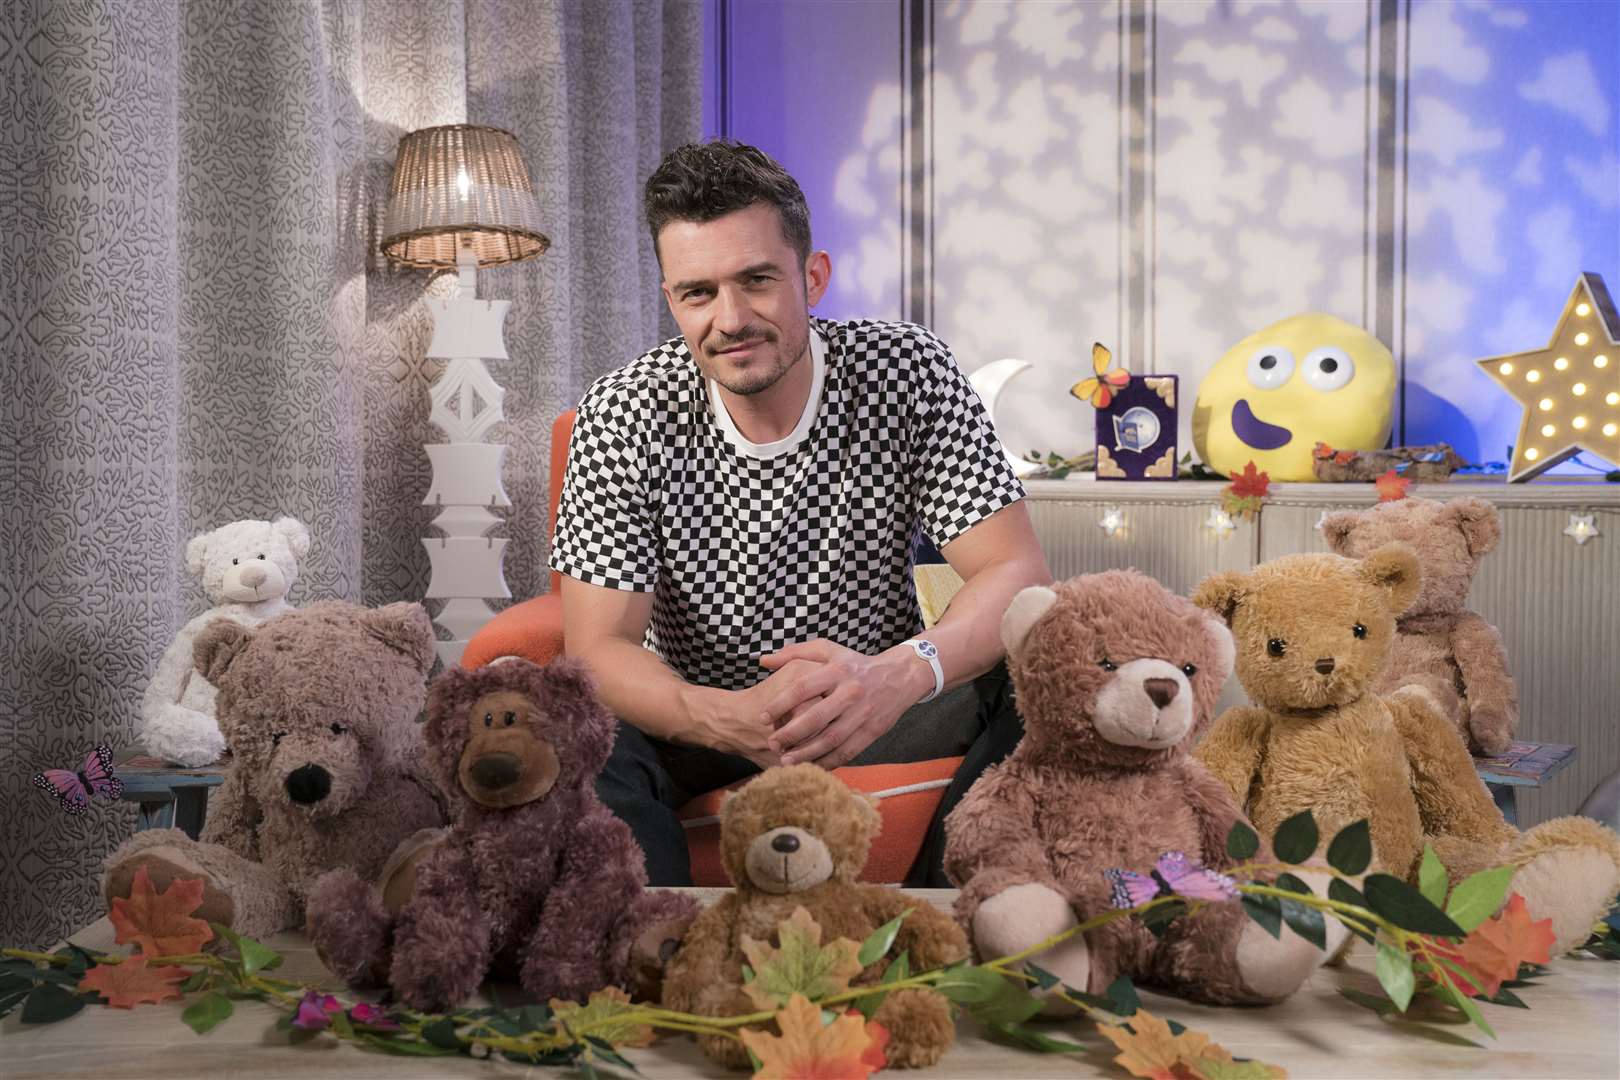 Cbeebies Bedtime Stories involves a celebrity reading a story at 6.50pm. Kent actor Orlando Bloom has also taken part.